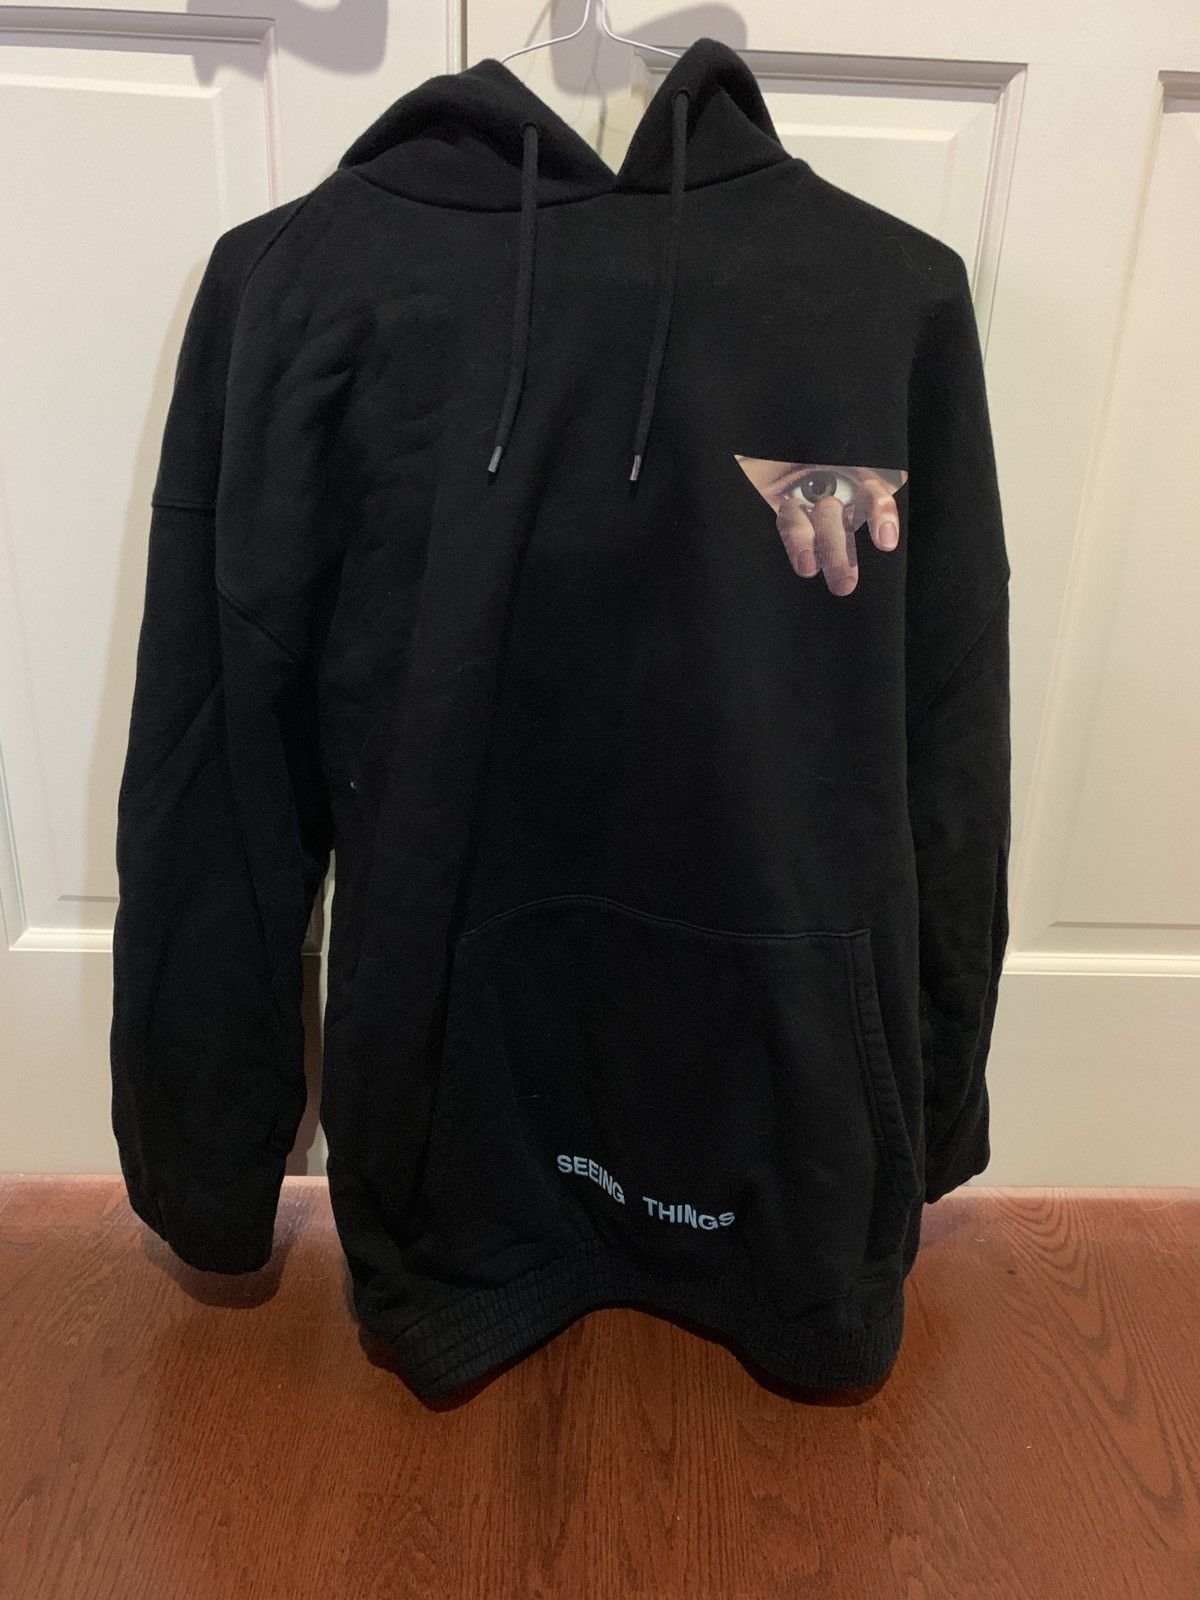 Off-White seeing things hoodie Size US L / EU 52-54 / 3 - 1 Preview